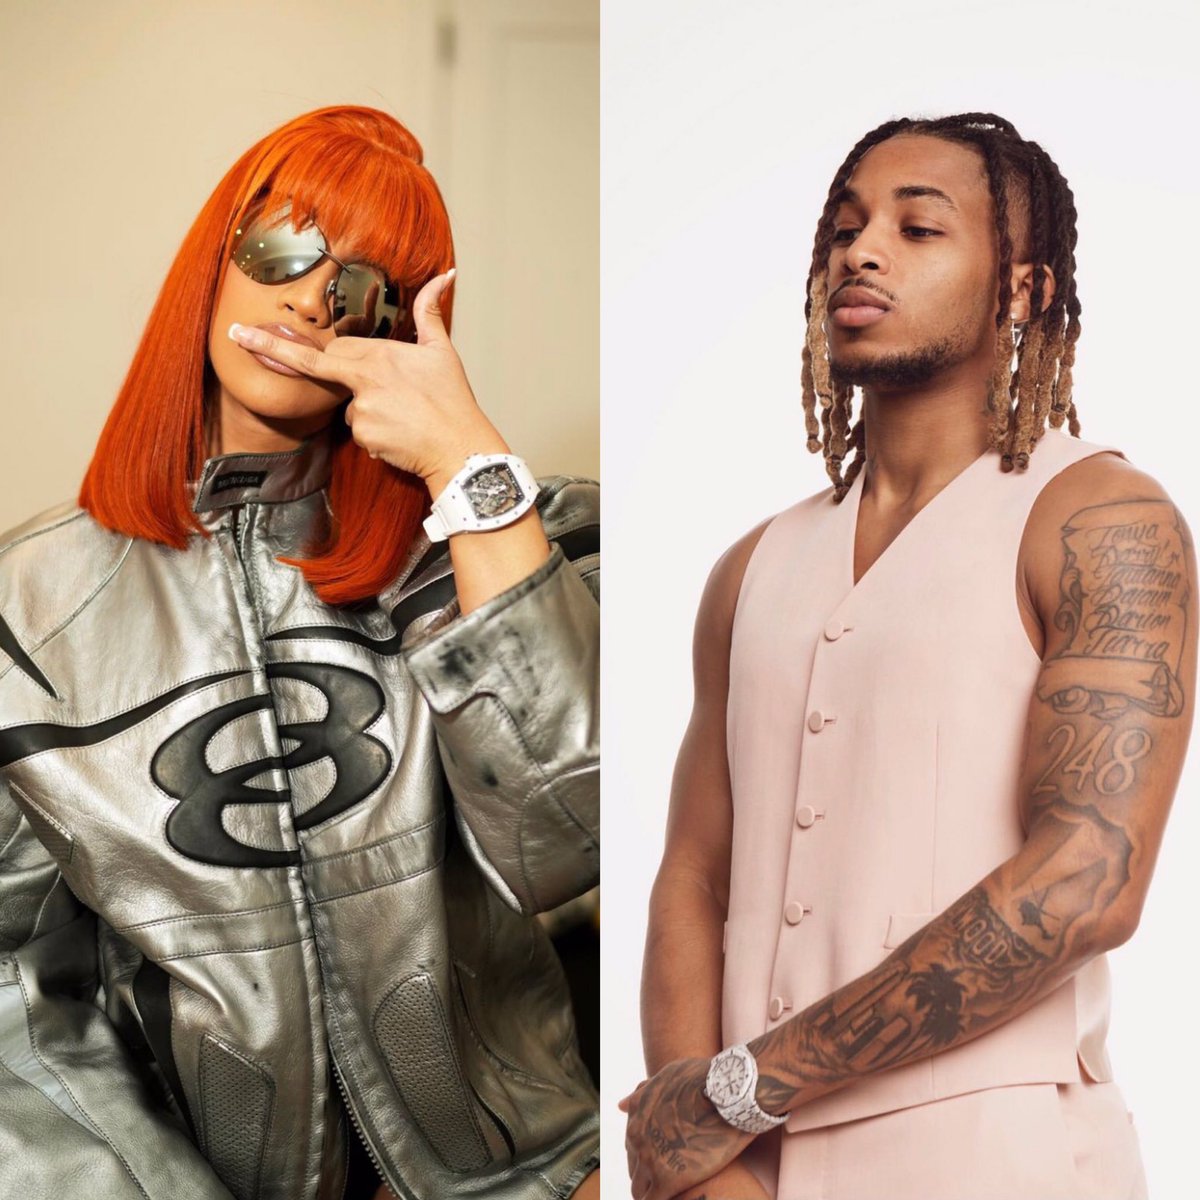 Rapper DDG appeared for an episode of 'Keep It 100!' where he revealed his Top 5 female rappers of all time, and ranked Cardi B in first place. “Cardi B is my number 1”